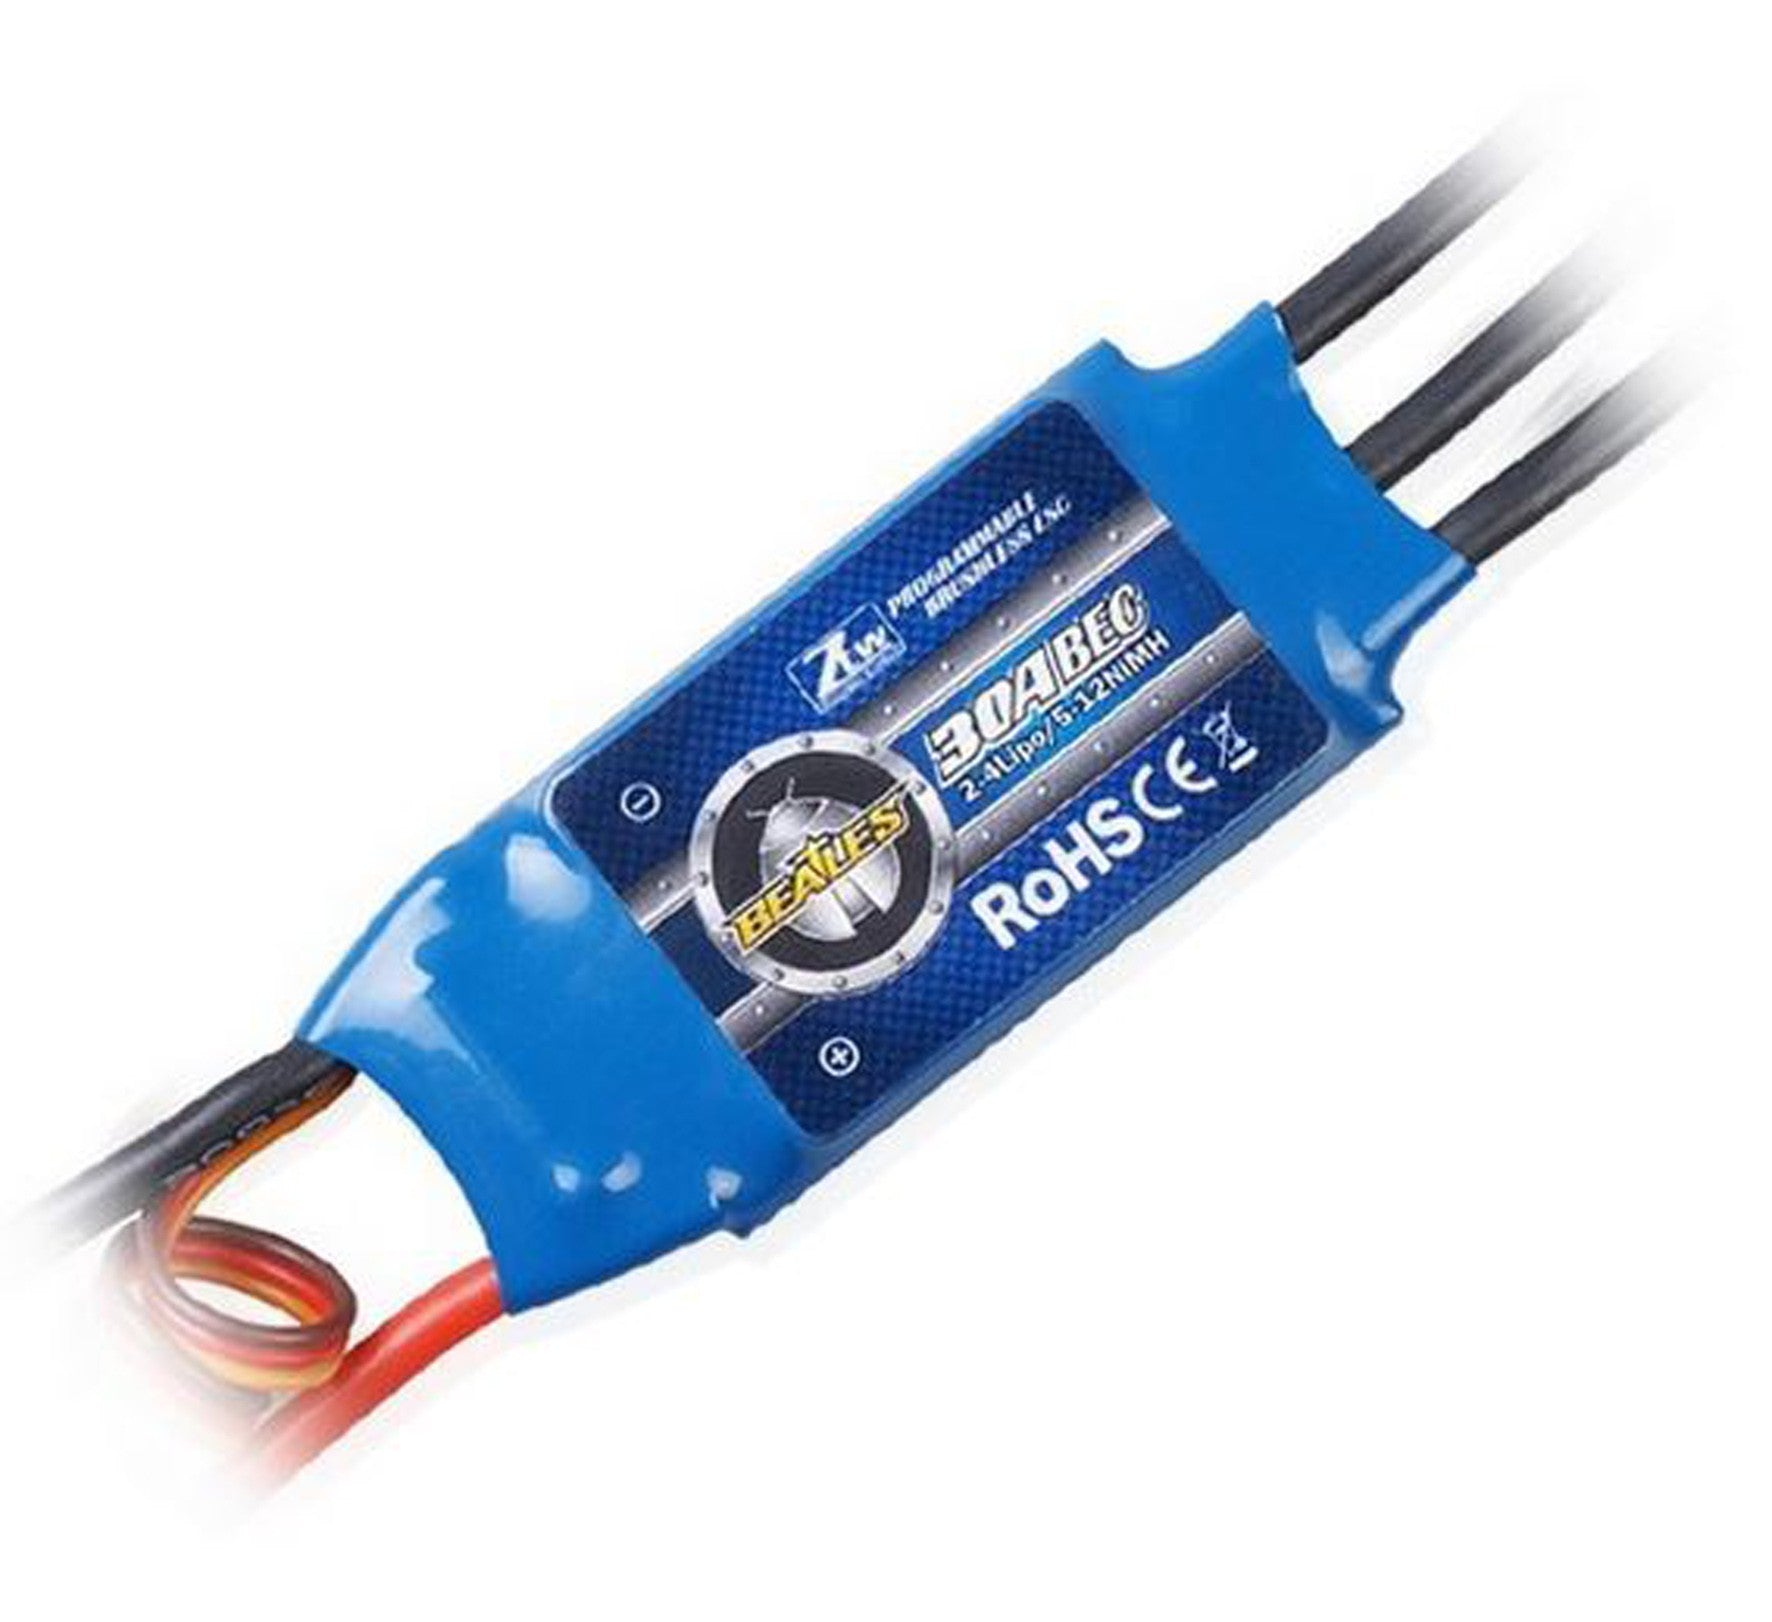 ZTW Beatles 30A Brushless ESC with 2A SBEC